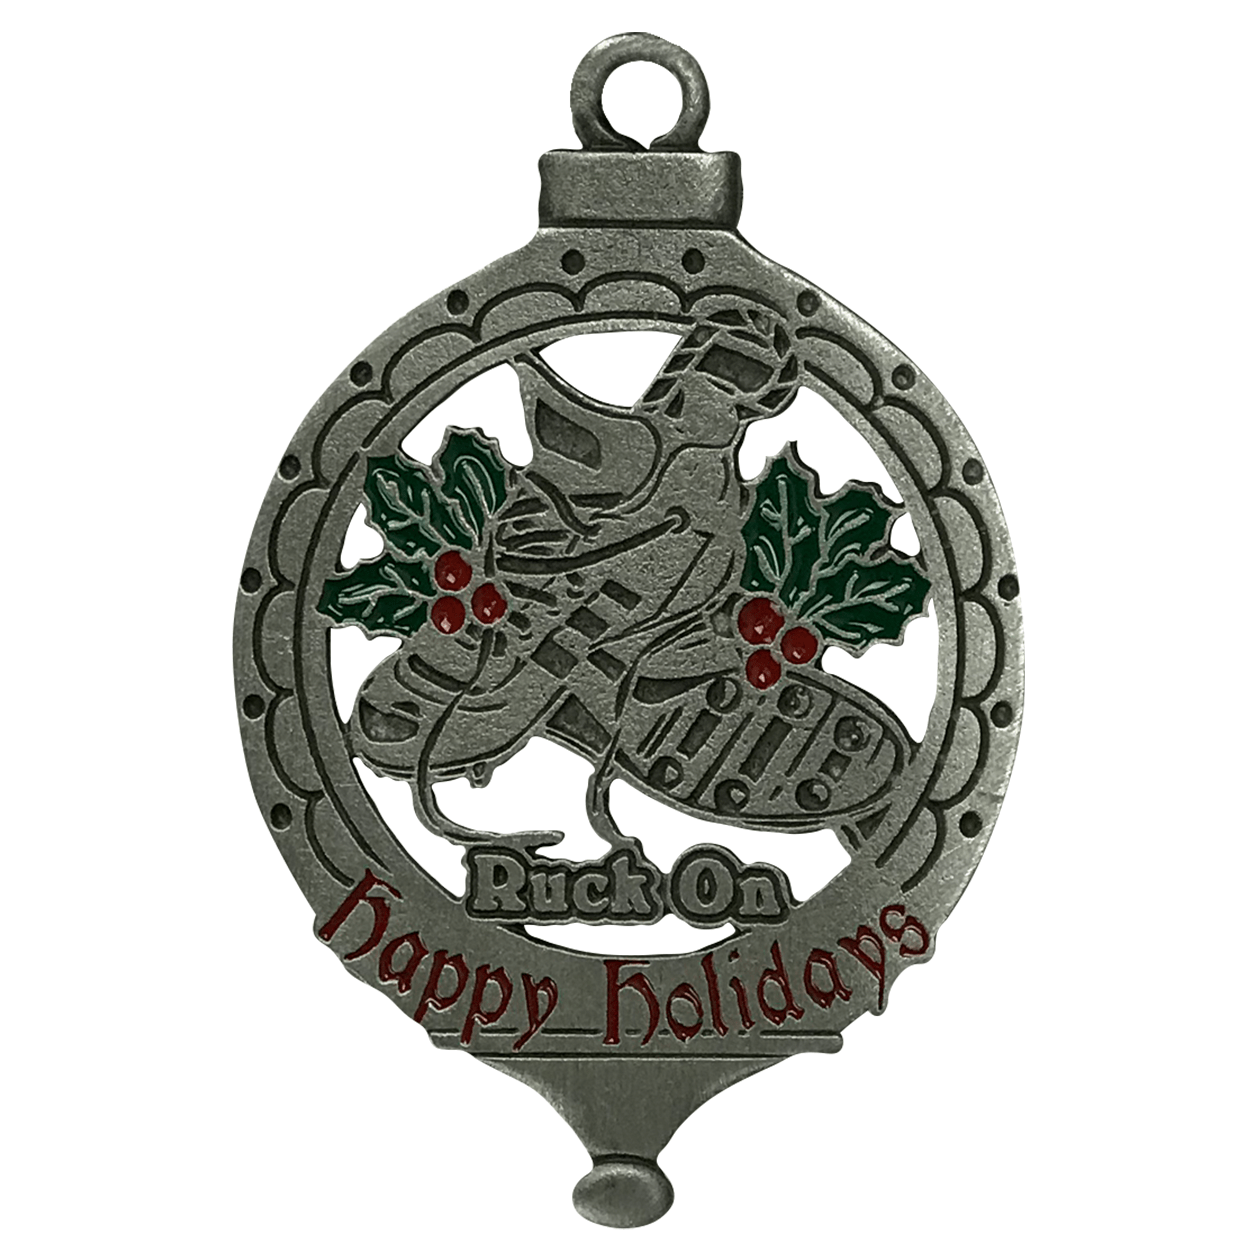 Rugby Imports Ruck On Rugby Holiday Ornament